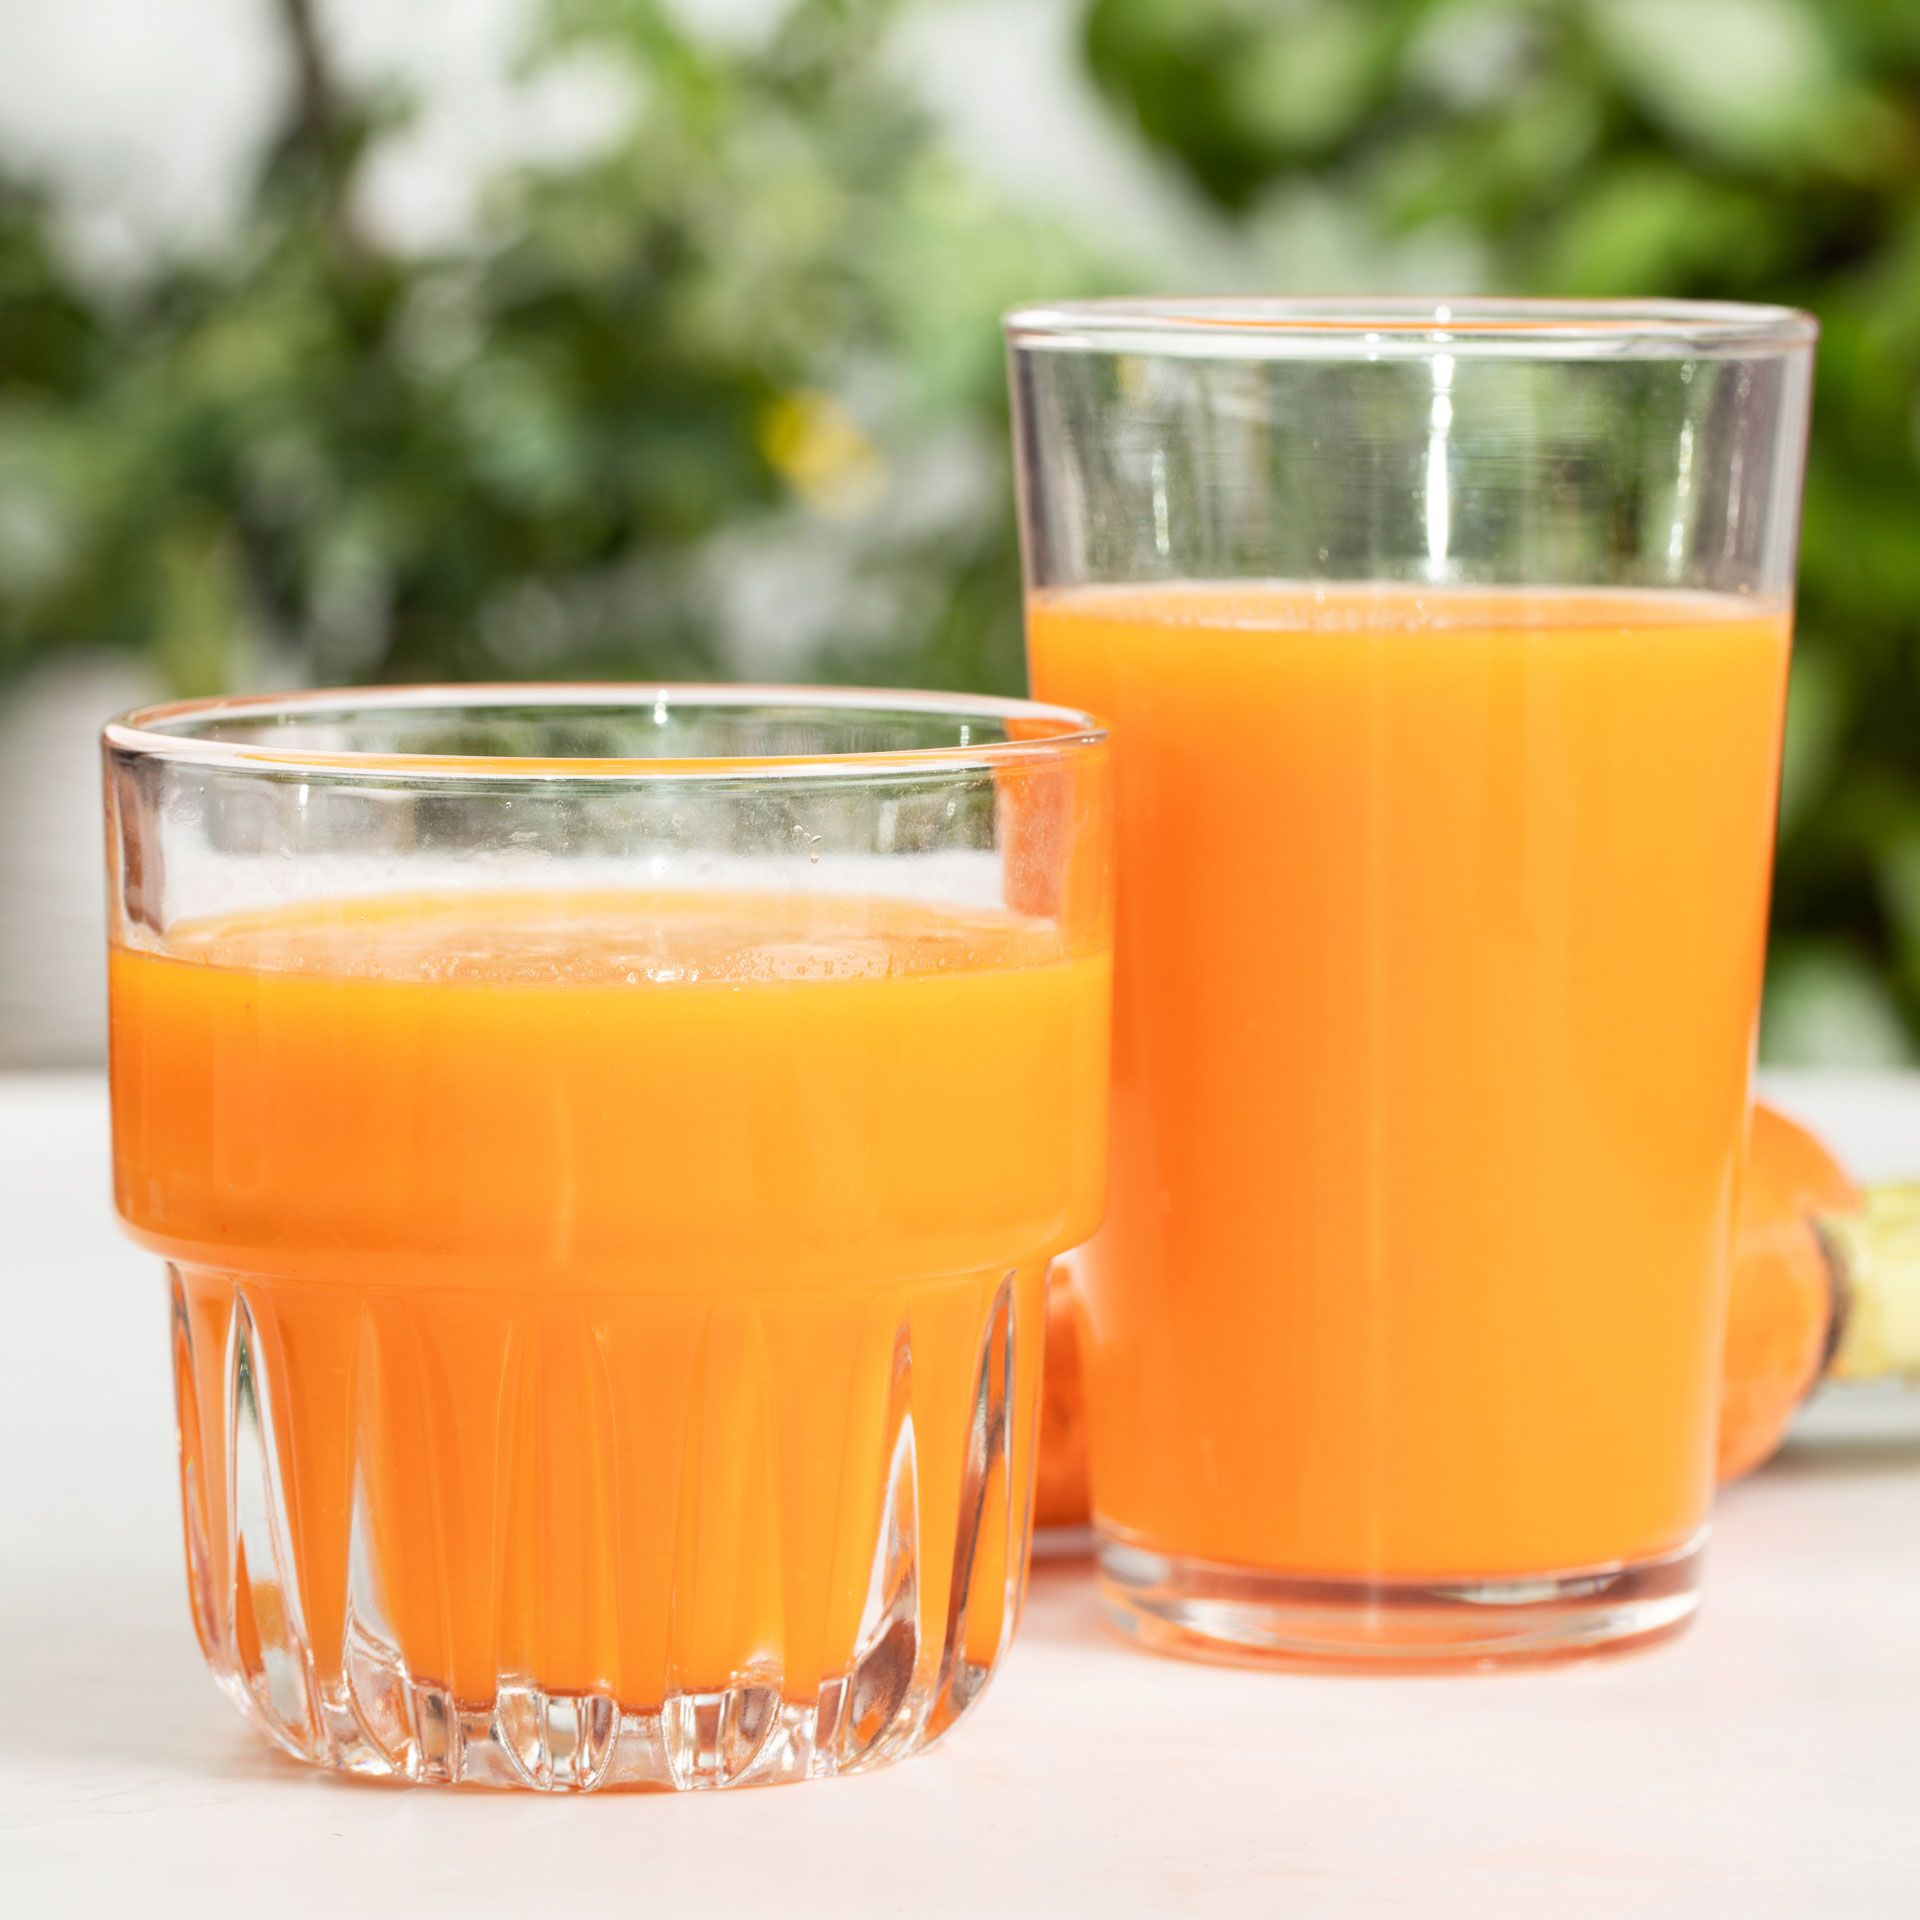 Making Carrot Juice: A Step-by-Step Guide In Tuban City